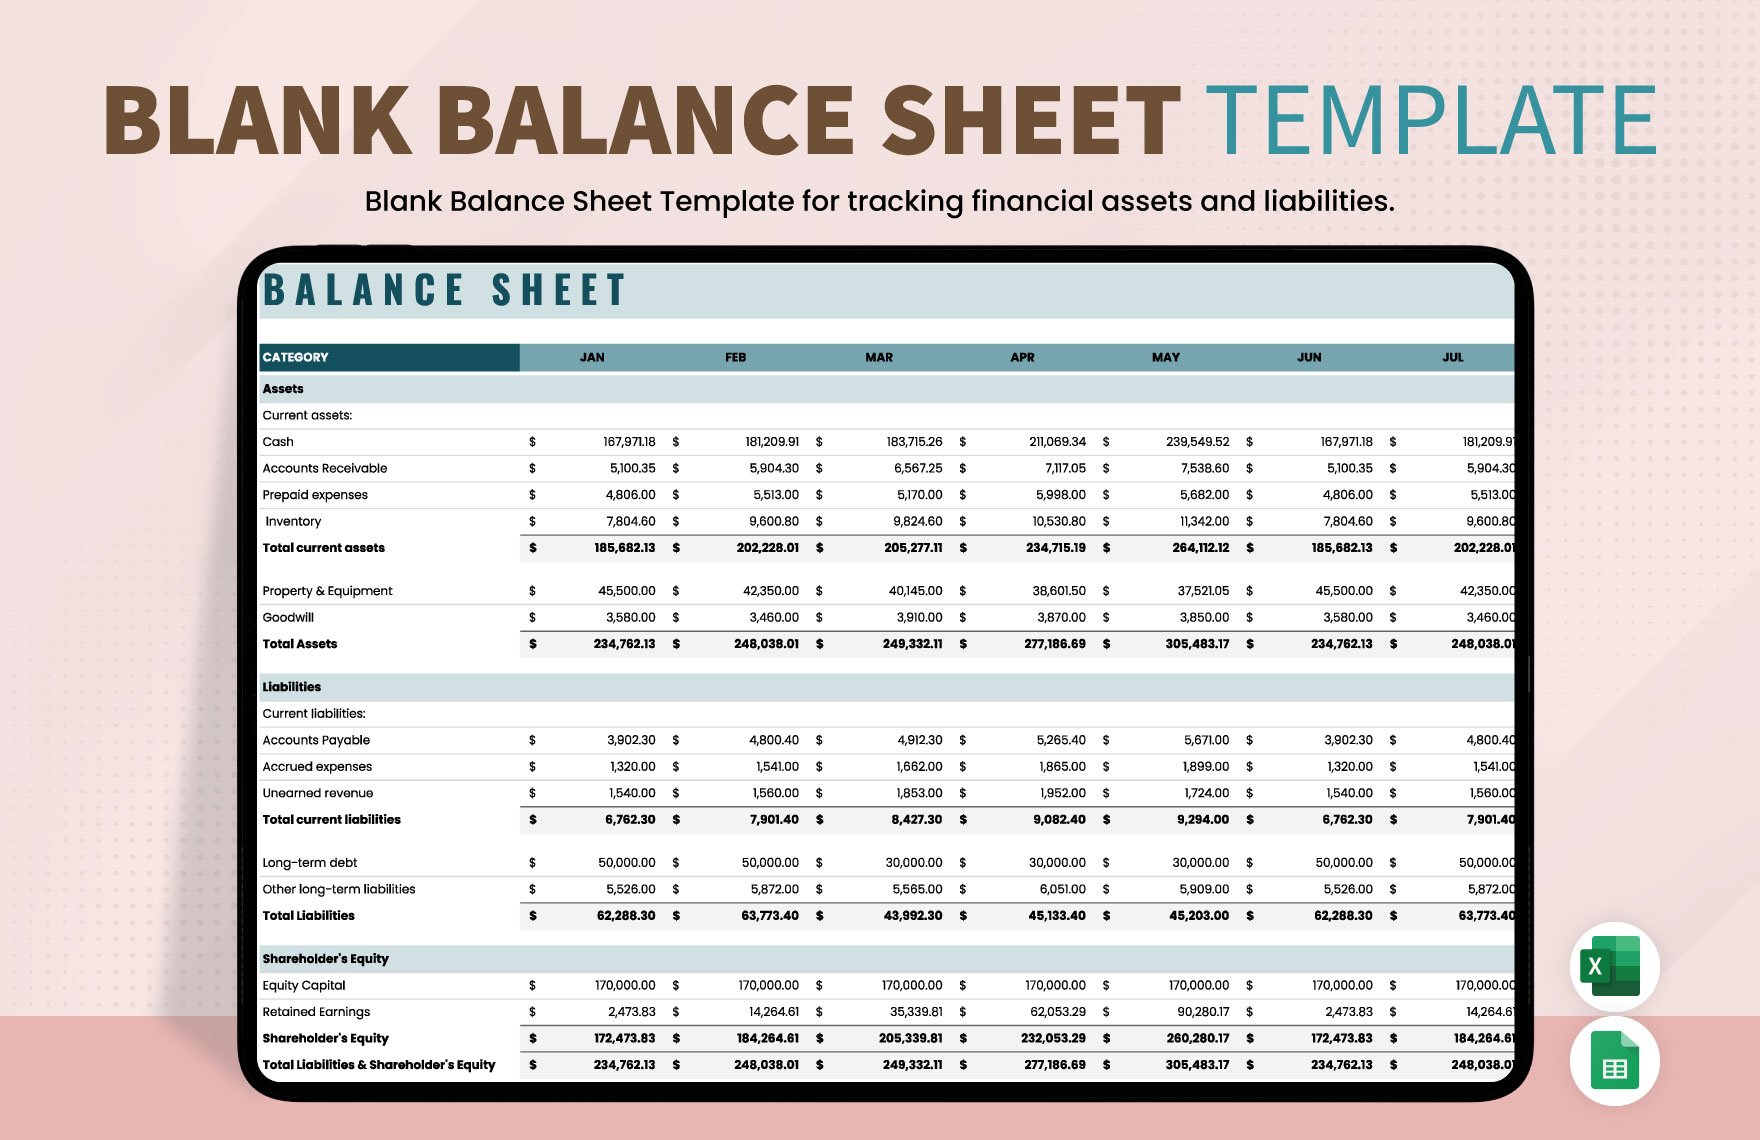 Blank Balance Sheet Template in Excel, Google Sheets